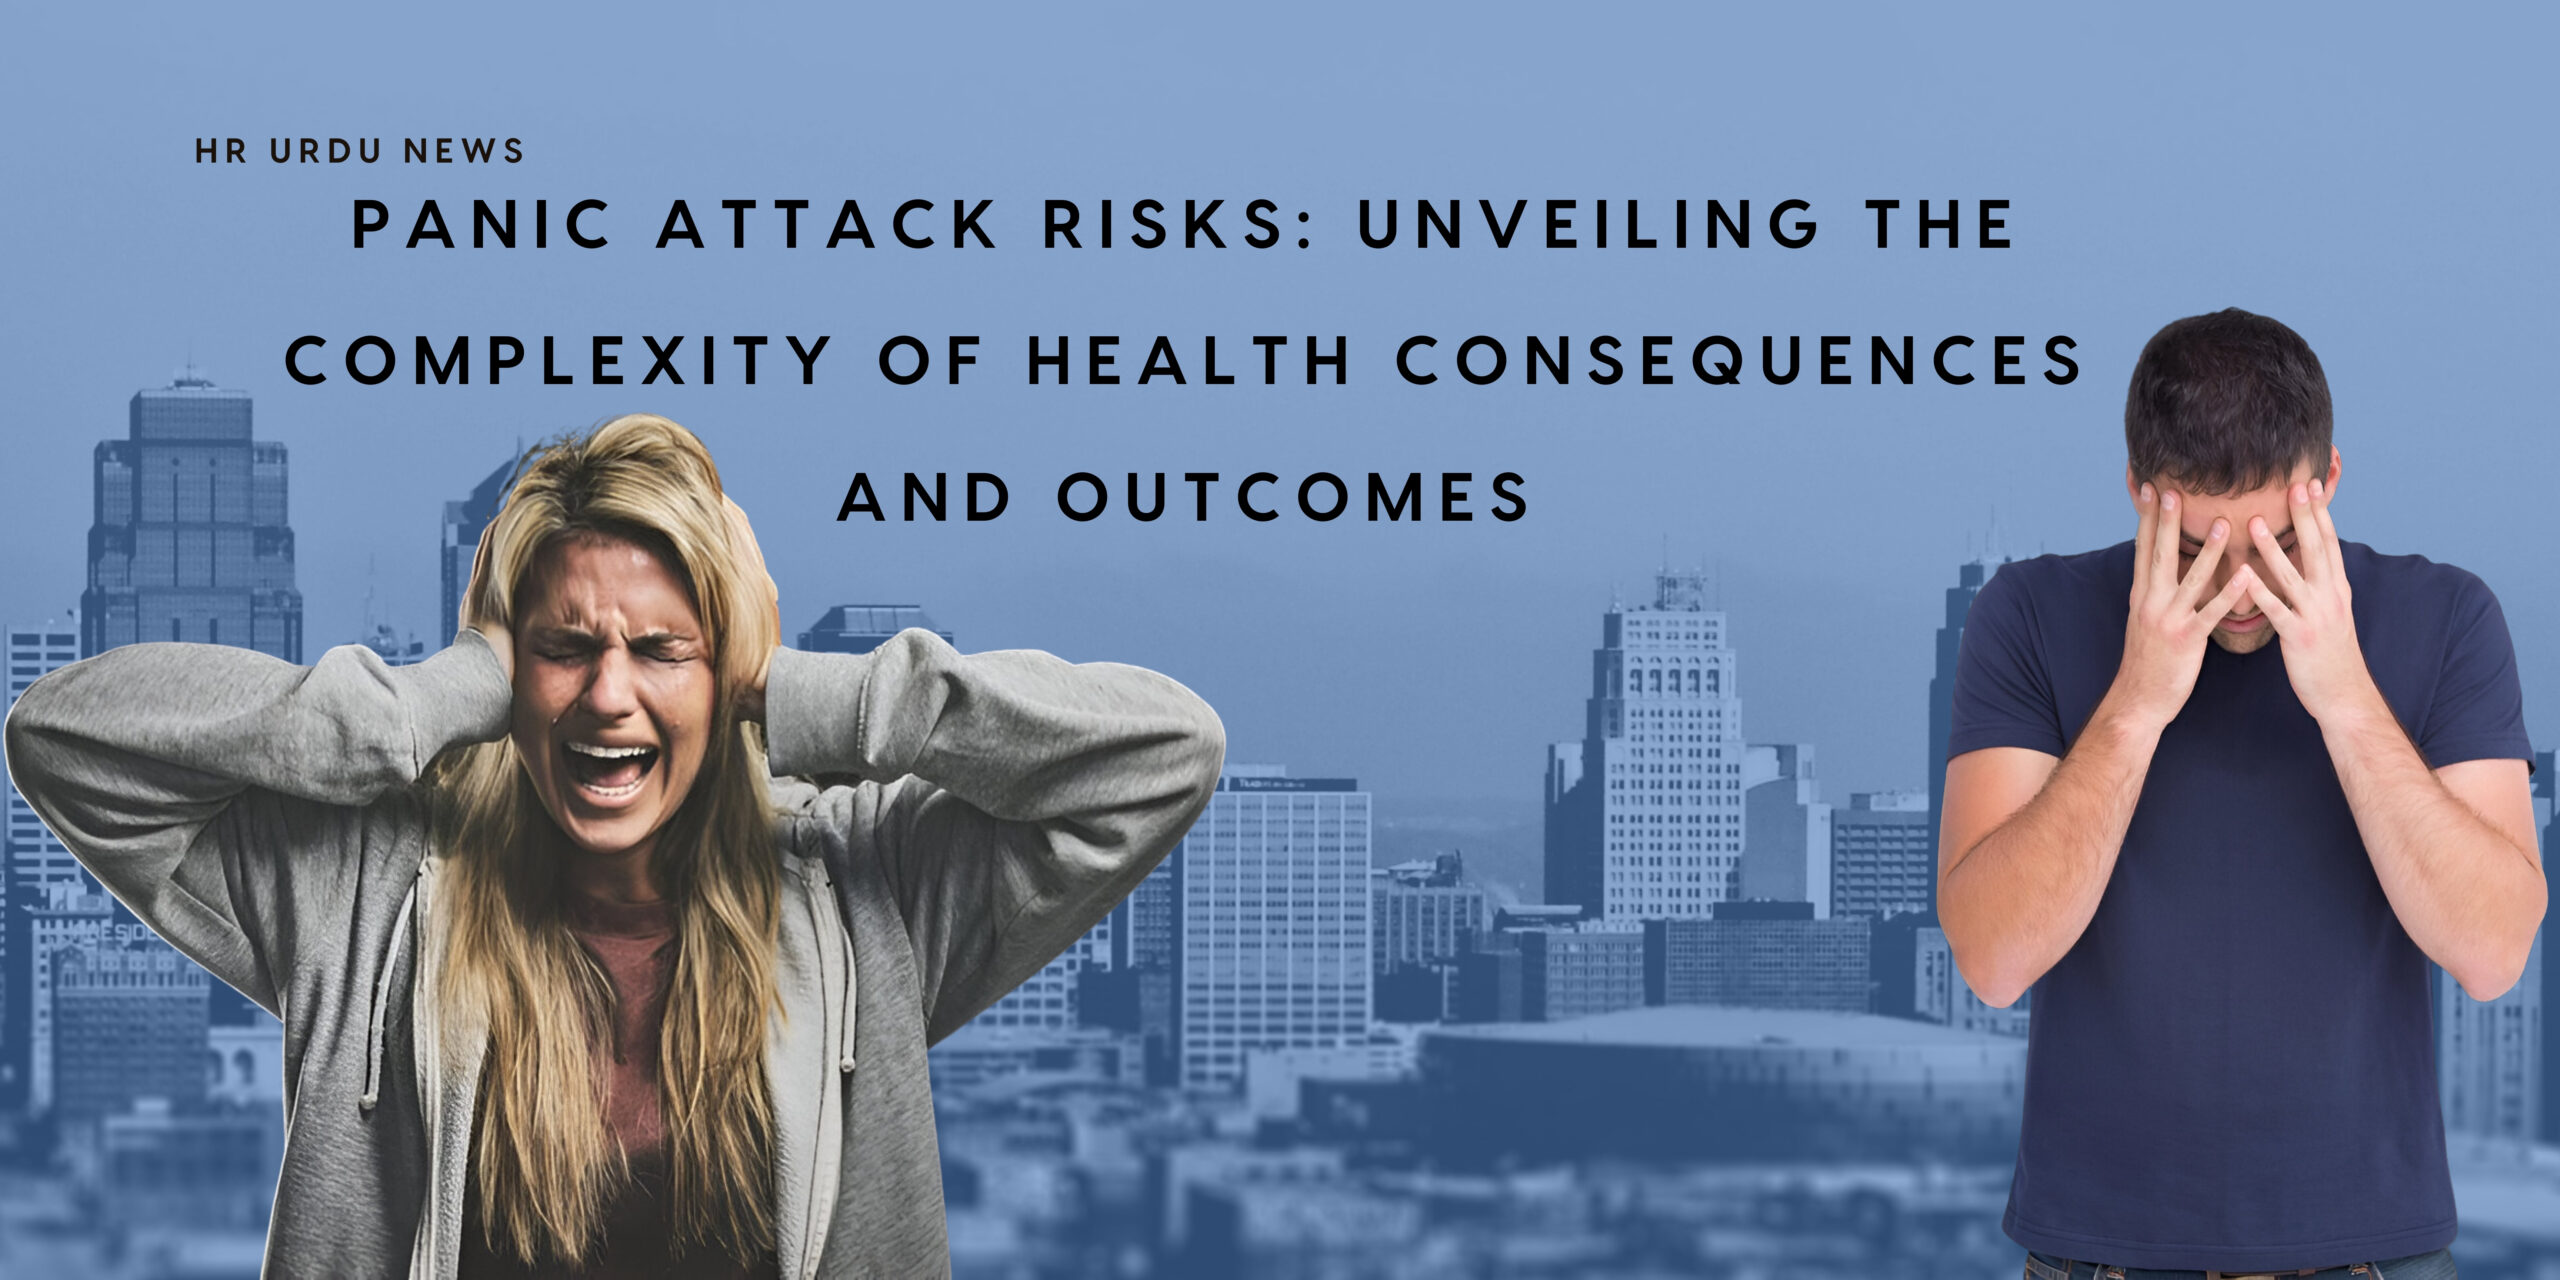 Panic Attack Risks: Unveiling the Complexity of Health Consequences and Outcomes